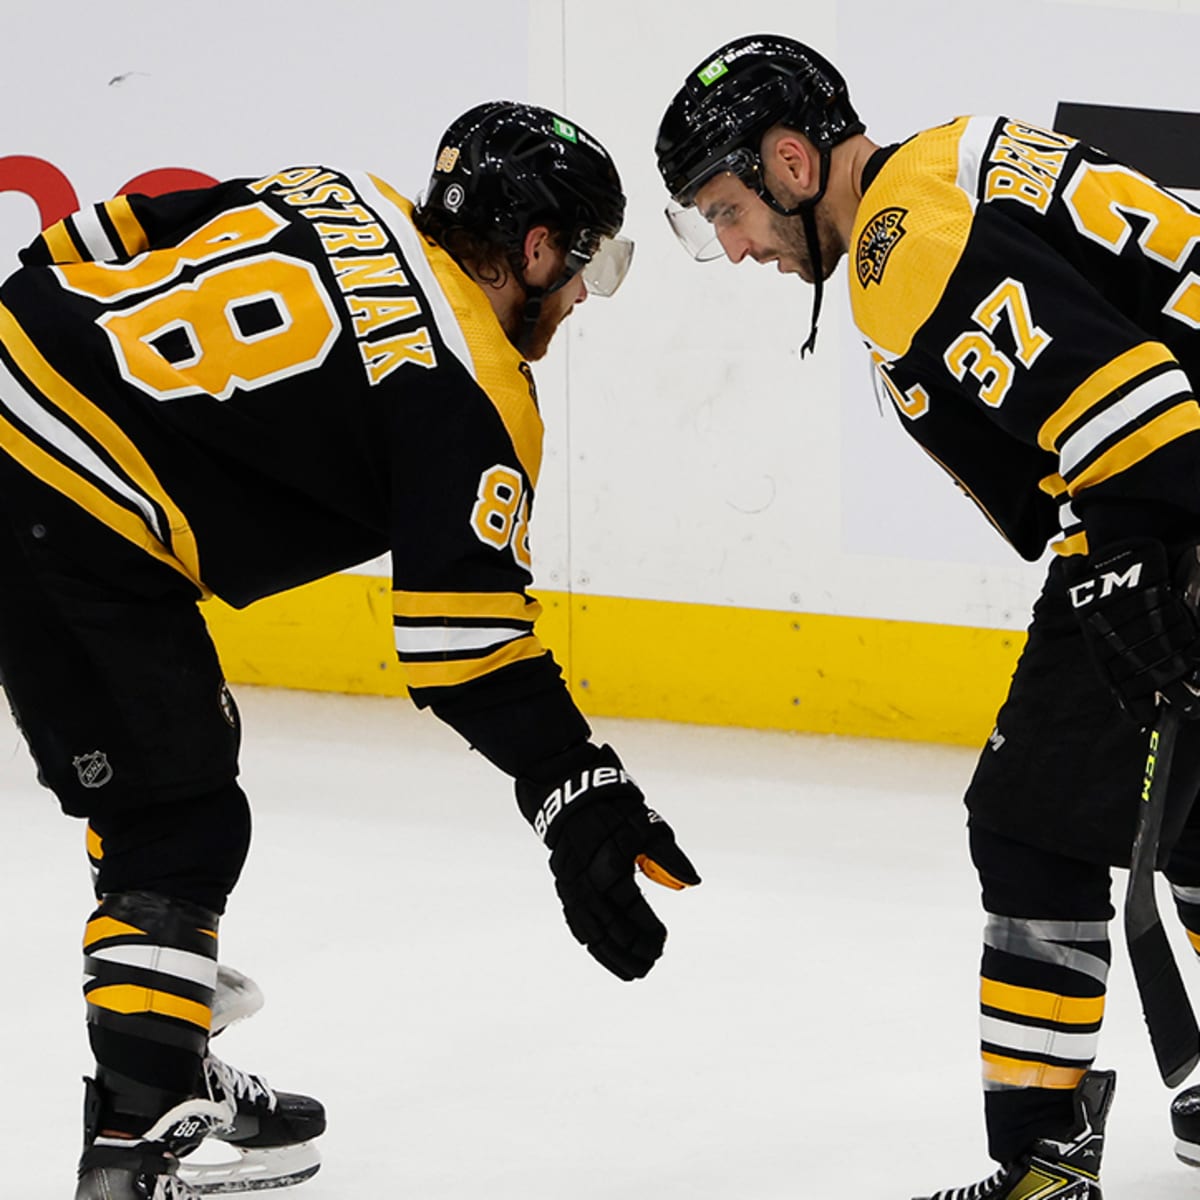 Bruins fastest ever to 50 wins, clinch playoff berth